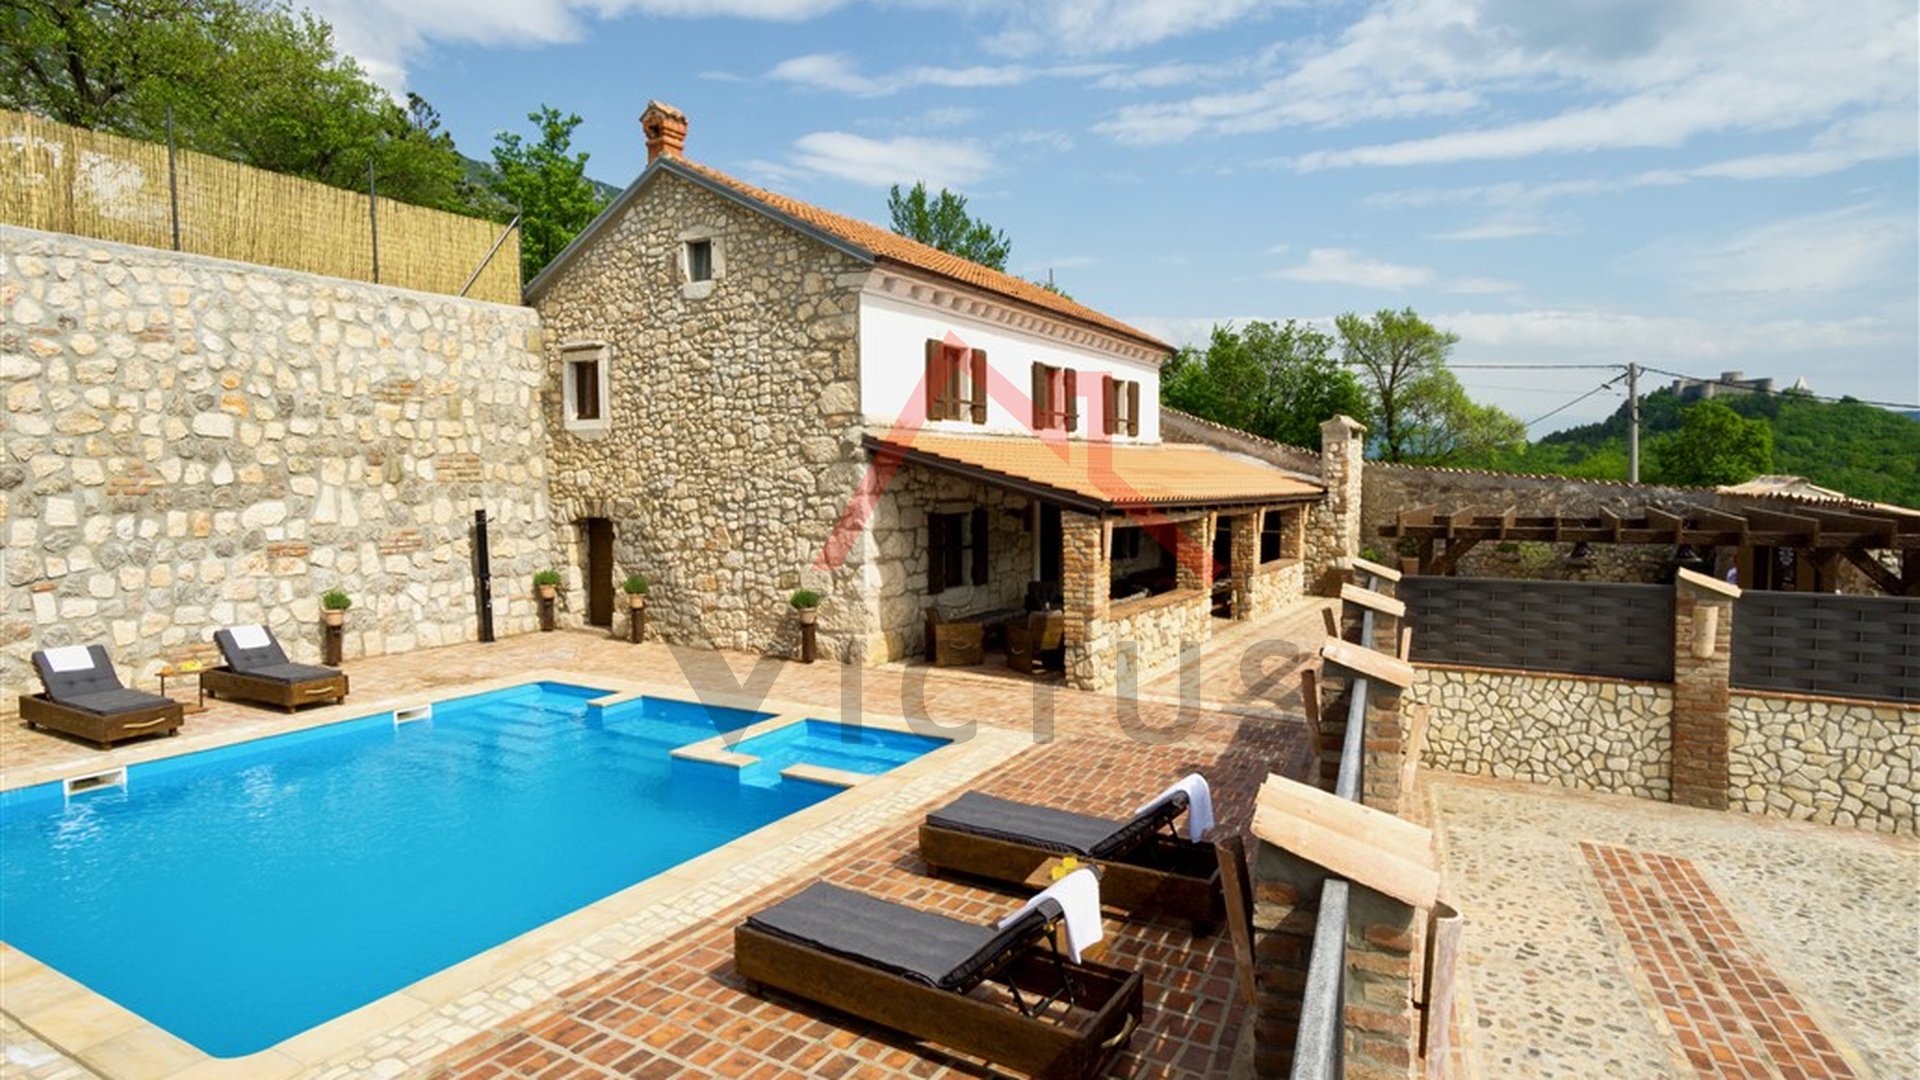 HINTERLAND OF CRIKVENICA, stone house with a pool